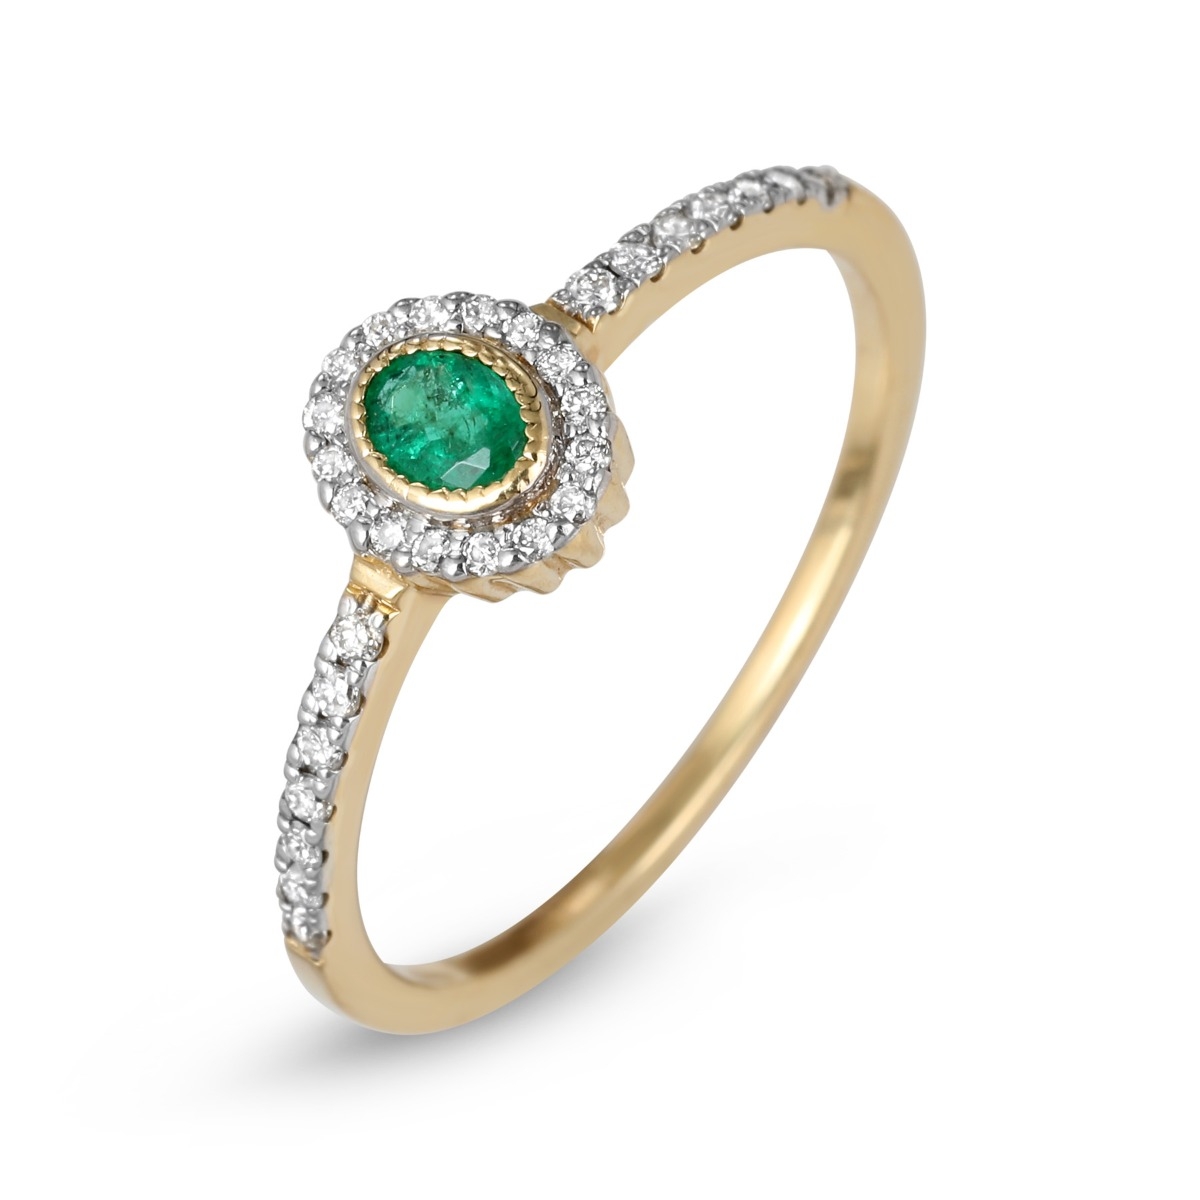 Anbinder 14K Yellow Gold Emerald and Diamond Engagement Ring - 1